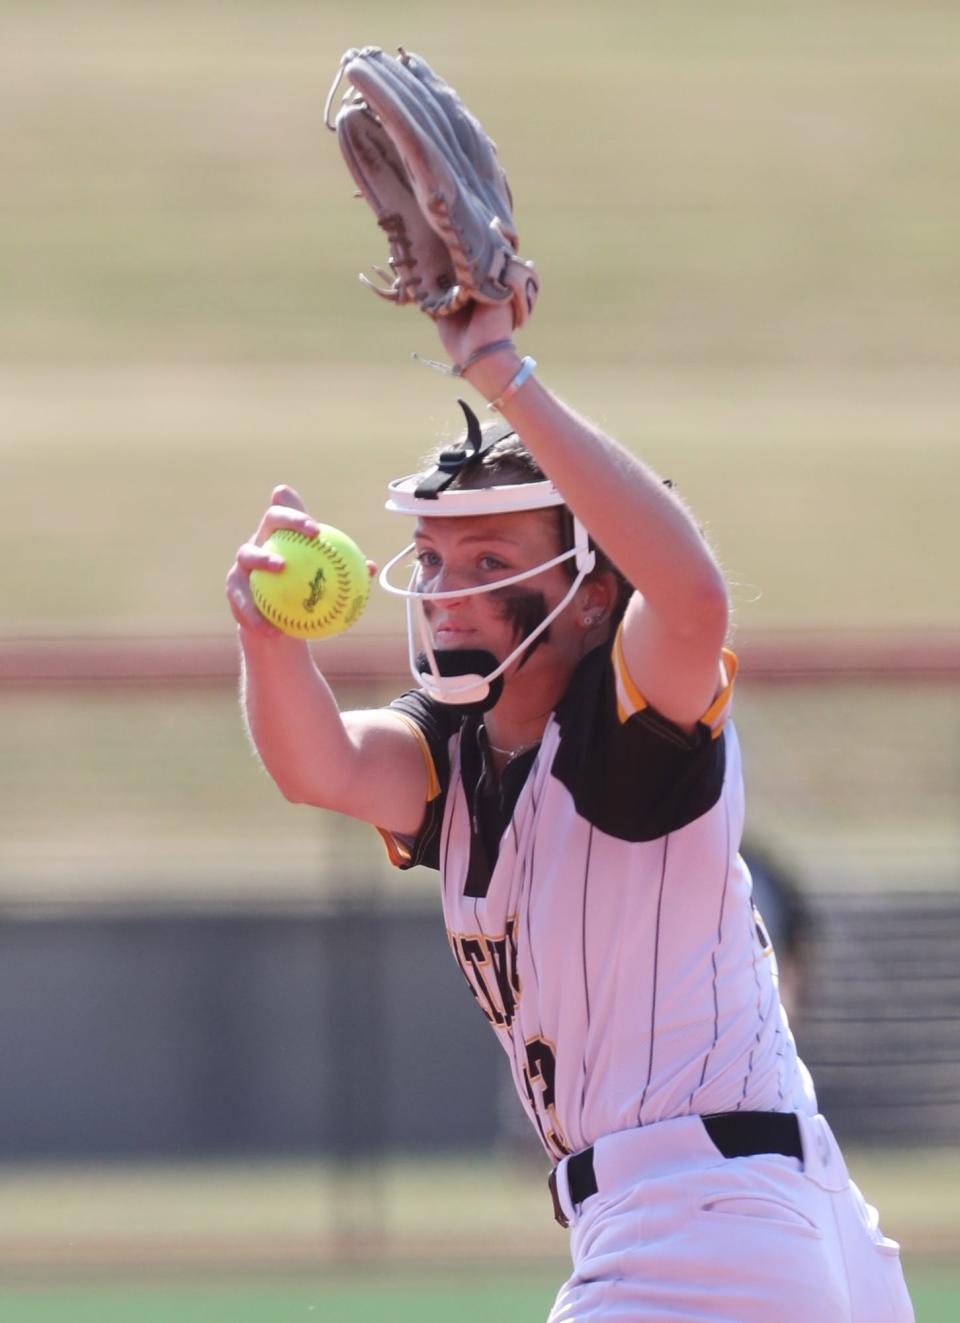 Watkins Memorial's Carsyn Cassady throws a pitch against Whitehouse Anthony Wayne in a Division I state semifinal last year. The Michigan State signee will try to lead the Warriors to their third consecutive state tournament.